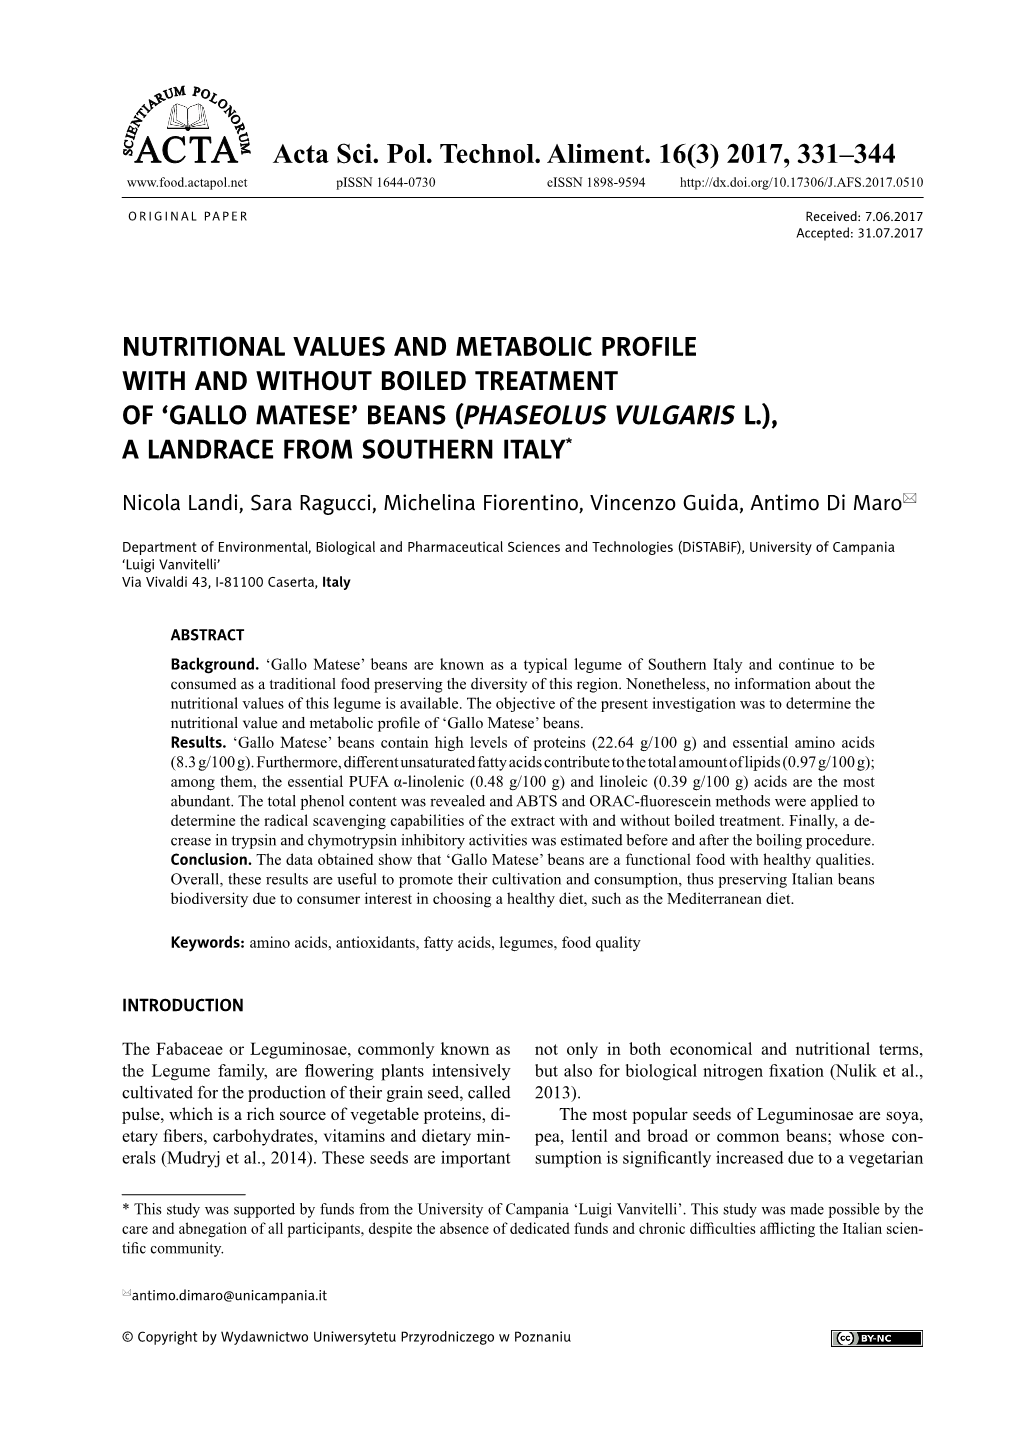 Nutritional Values and Metabolic Profile with and Without Boiled Treatment of ‘Gallo Matese’ Beans (Phaseolus Vulgaris L.), a Landrace from Southern Italy*